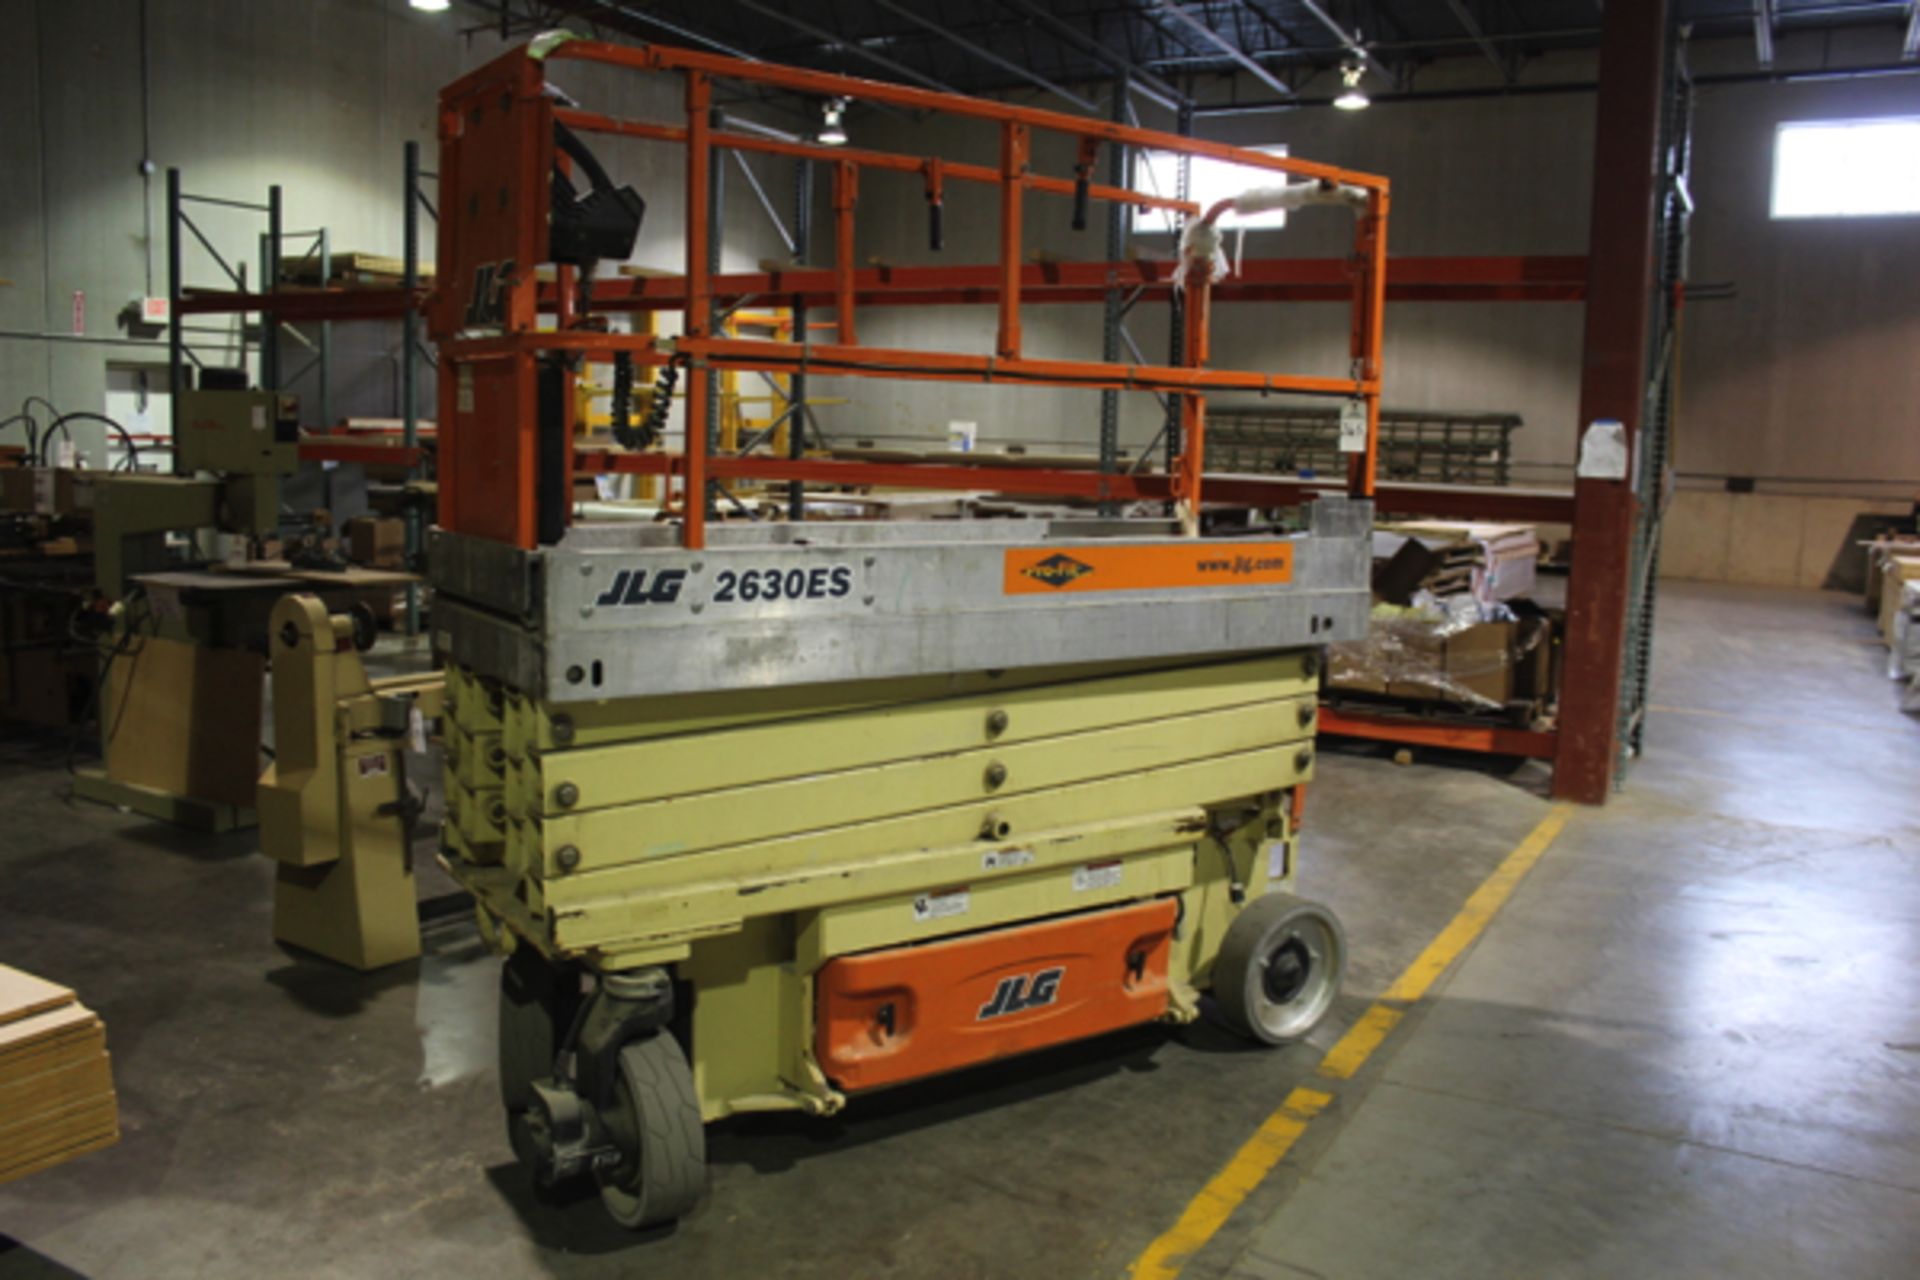 JLG Scissor Lift, M# 2630ES, S/N 02001175987 | Rigging Price: Hand Carry or Contact Rigger